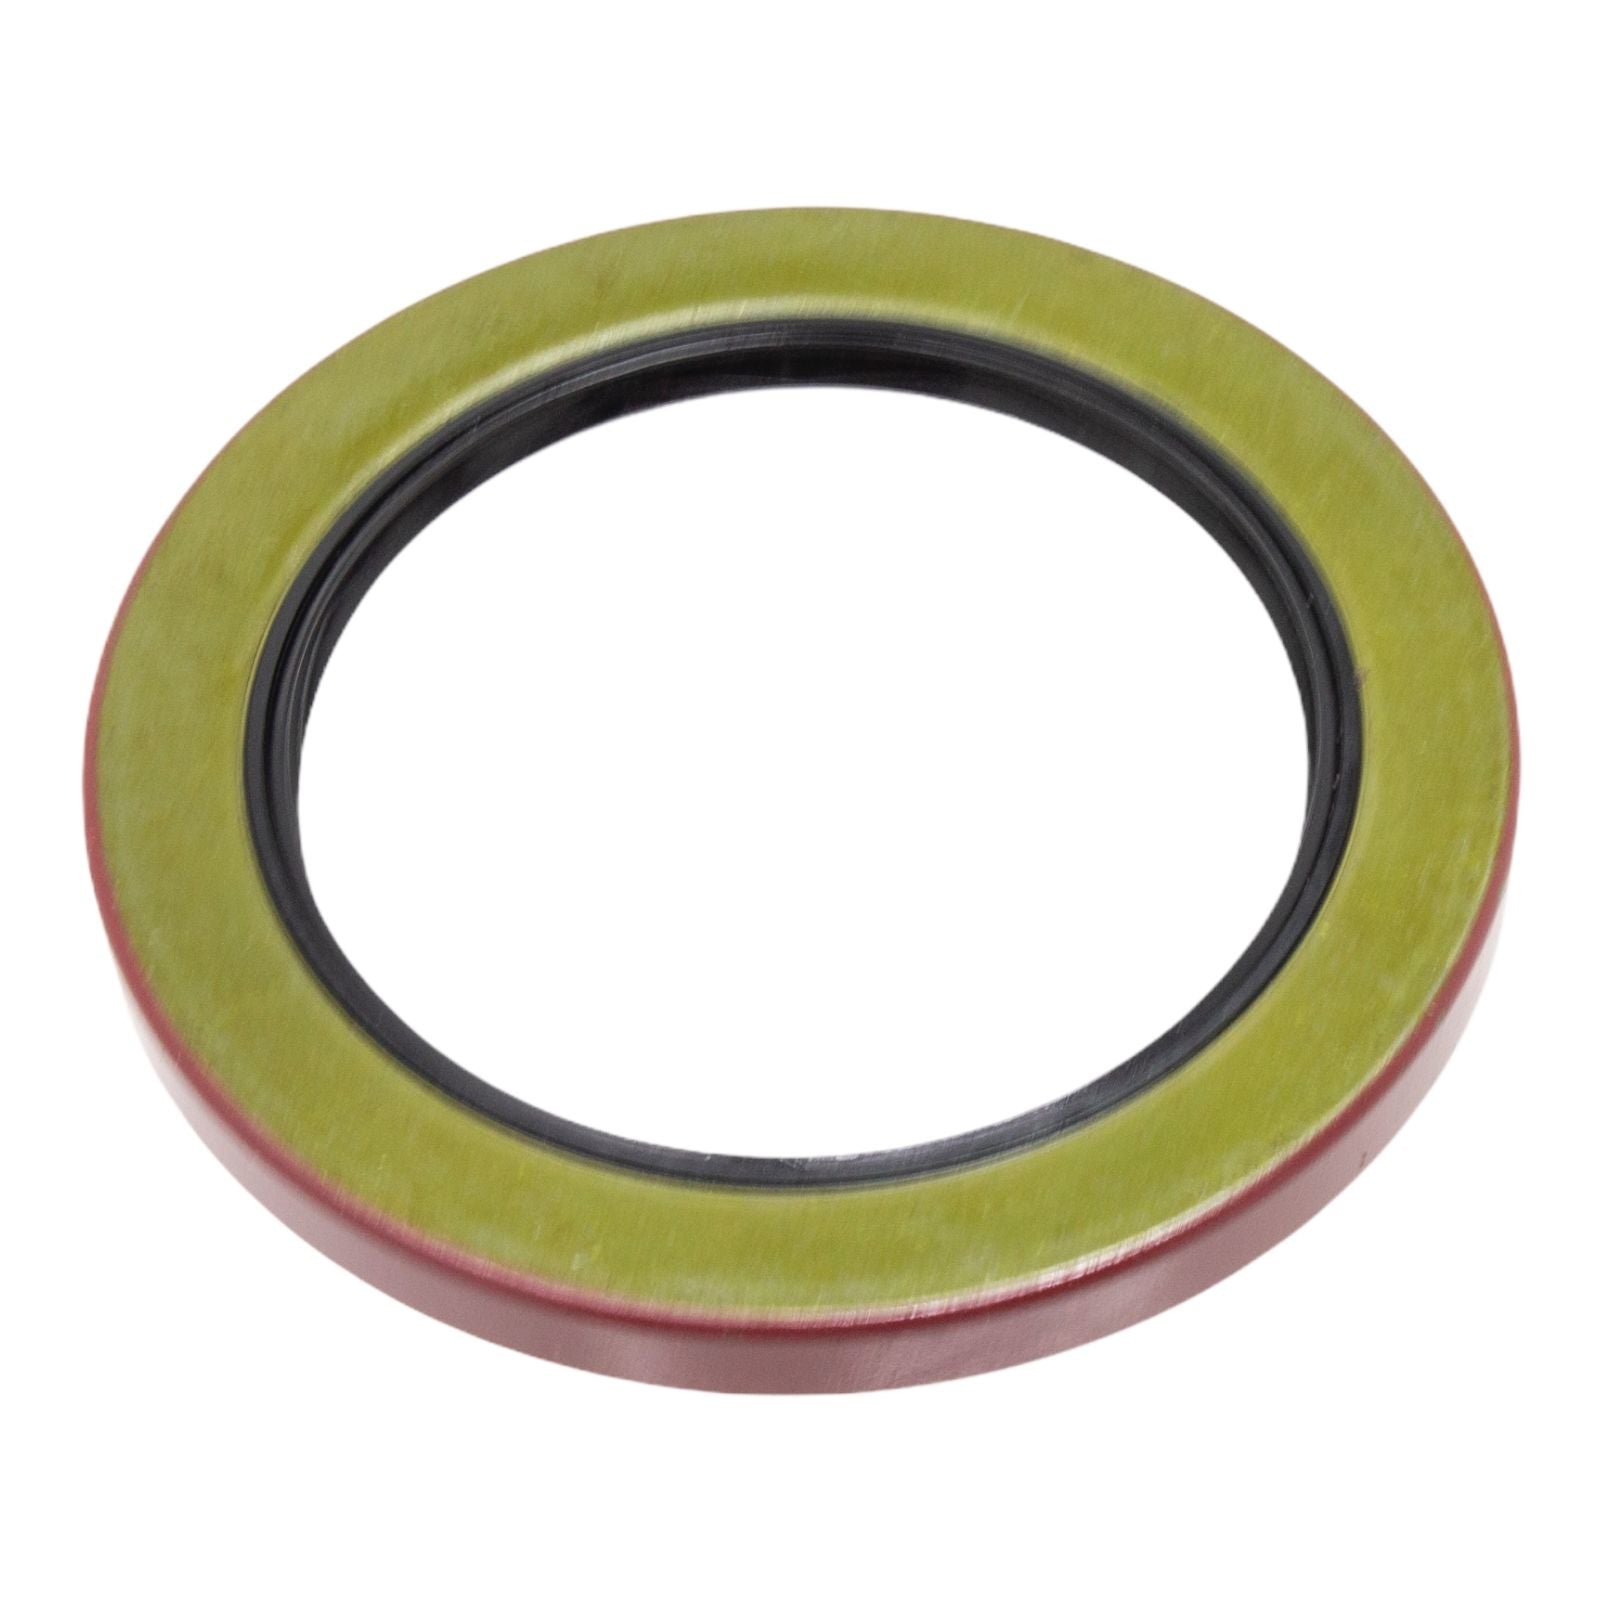 Duraforce 6671138, Axle Oil Seal For Bobcat